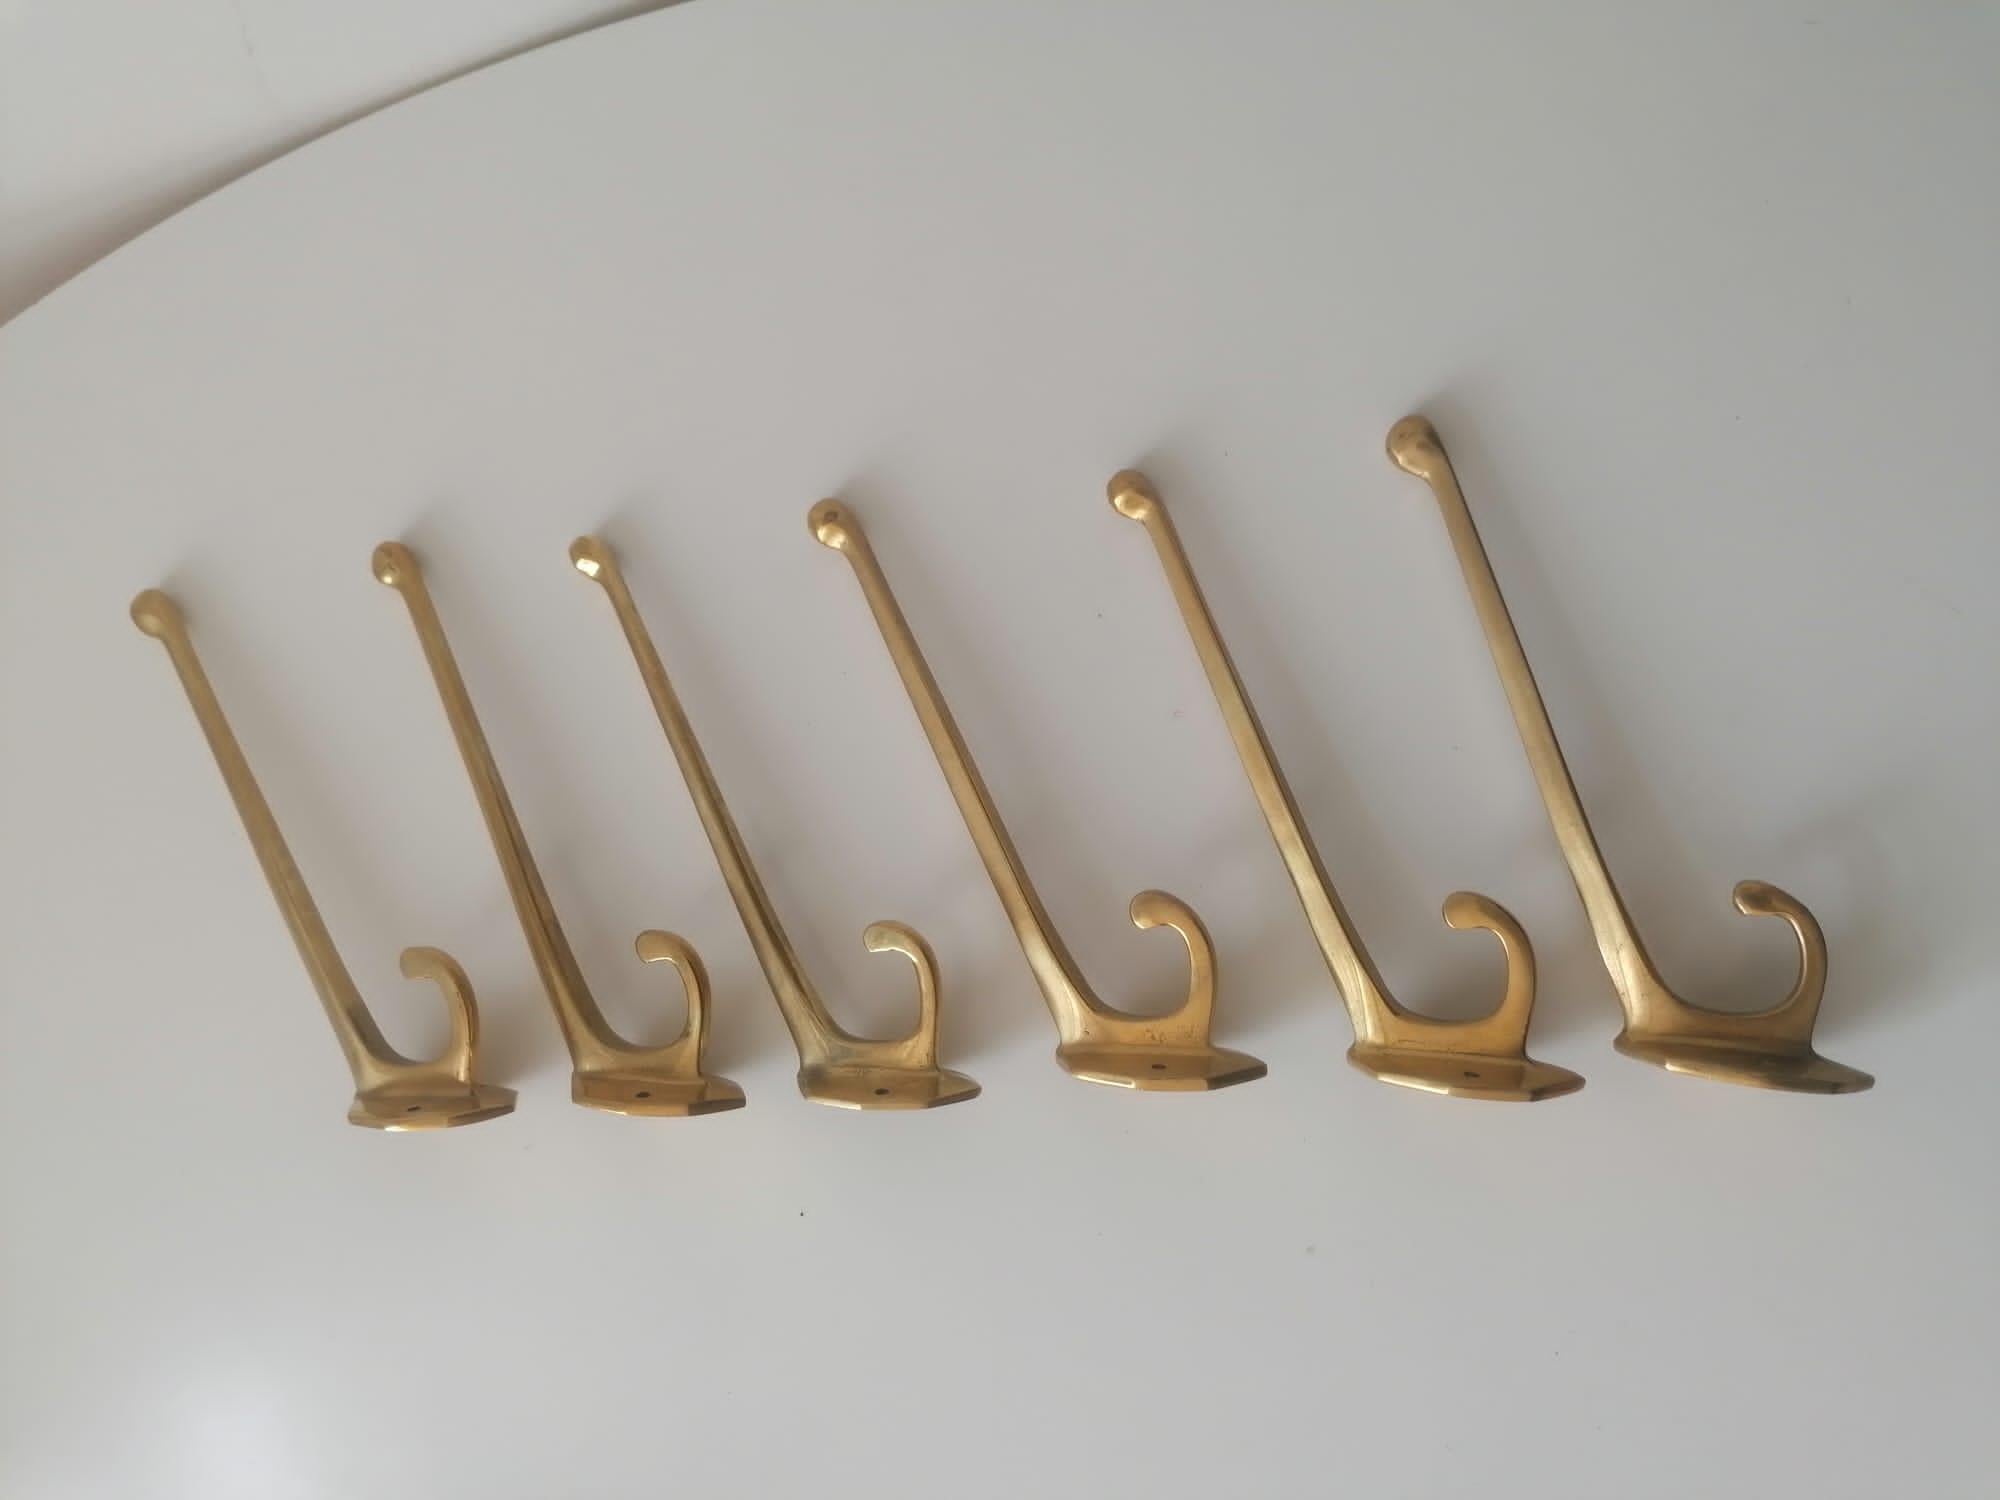 Cast brass made in Austria, circa 1900-1910.
A set of six
Delivery time 3-4 weeks.